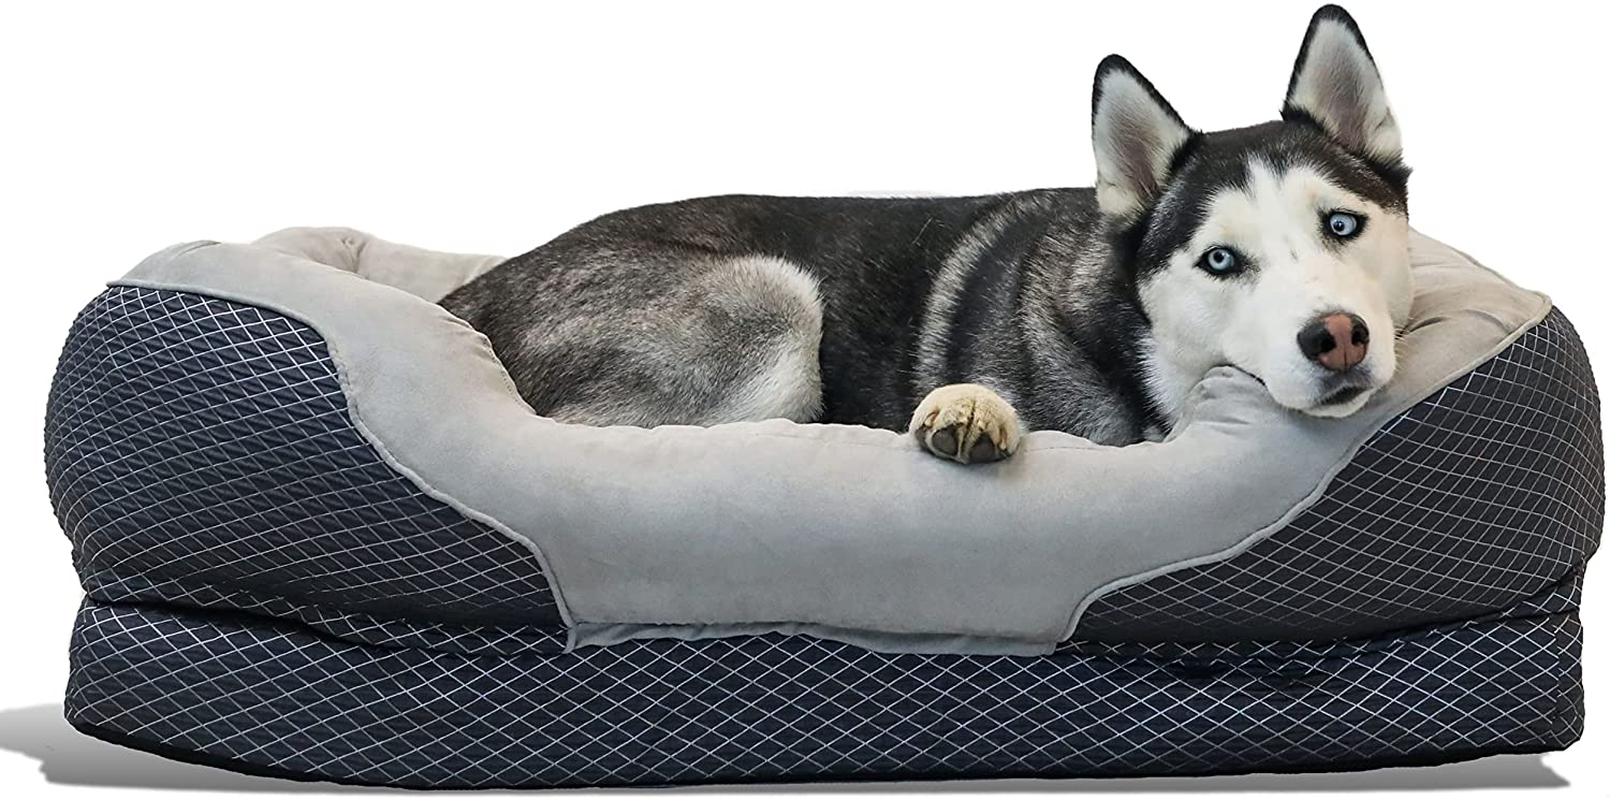 Barksbar Snuggly Sleeper Large Gray Diamond Orthopedic Dog Bed with Solid Orthopedic Foam, Soft Cotton Bolster, and Ultra Soft Plush Sleeping Space - 40 X 30 Inches